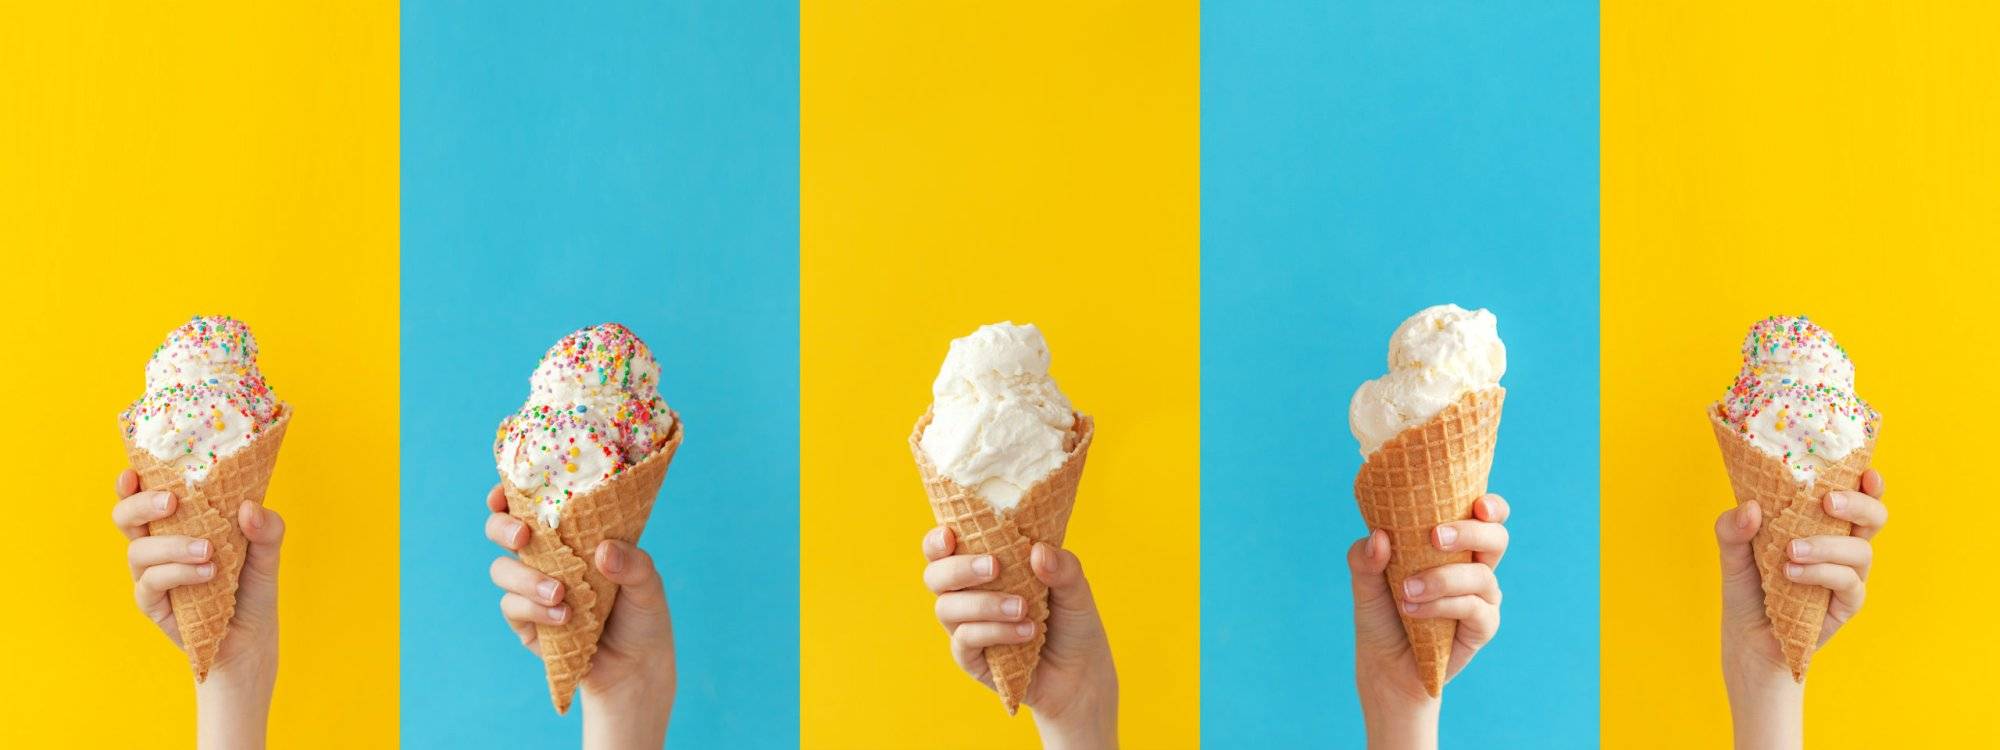 Child holding a vanilla ice cream cone on a bright yellow and blue background. Banner